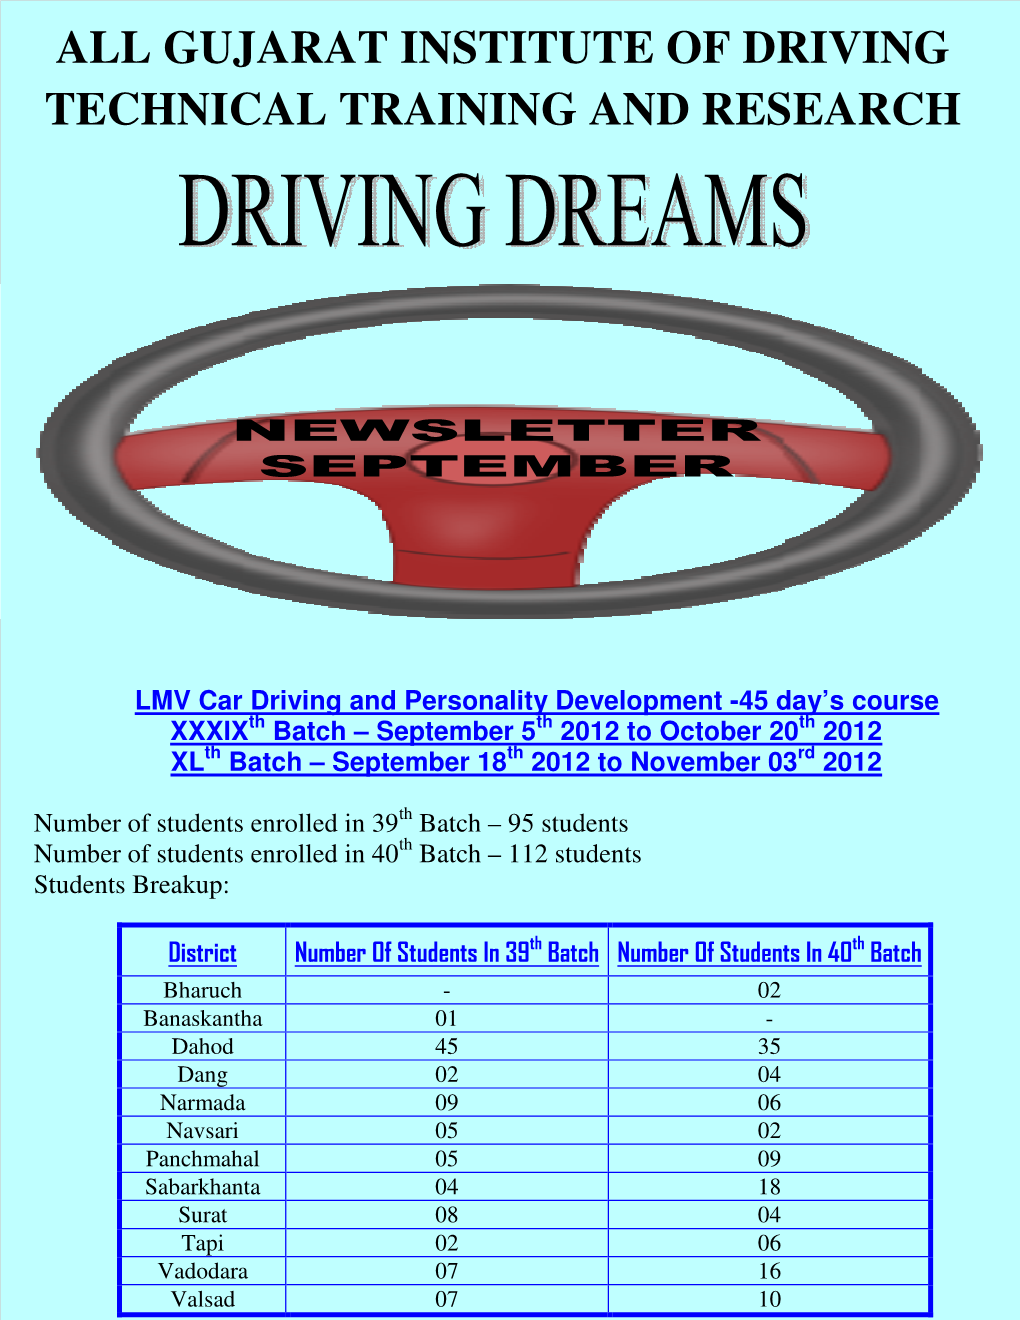 All Gujarat Institute of Driving Technical Training and Research